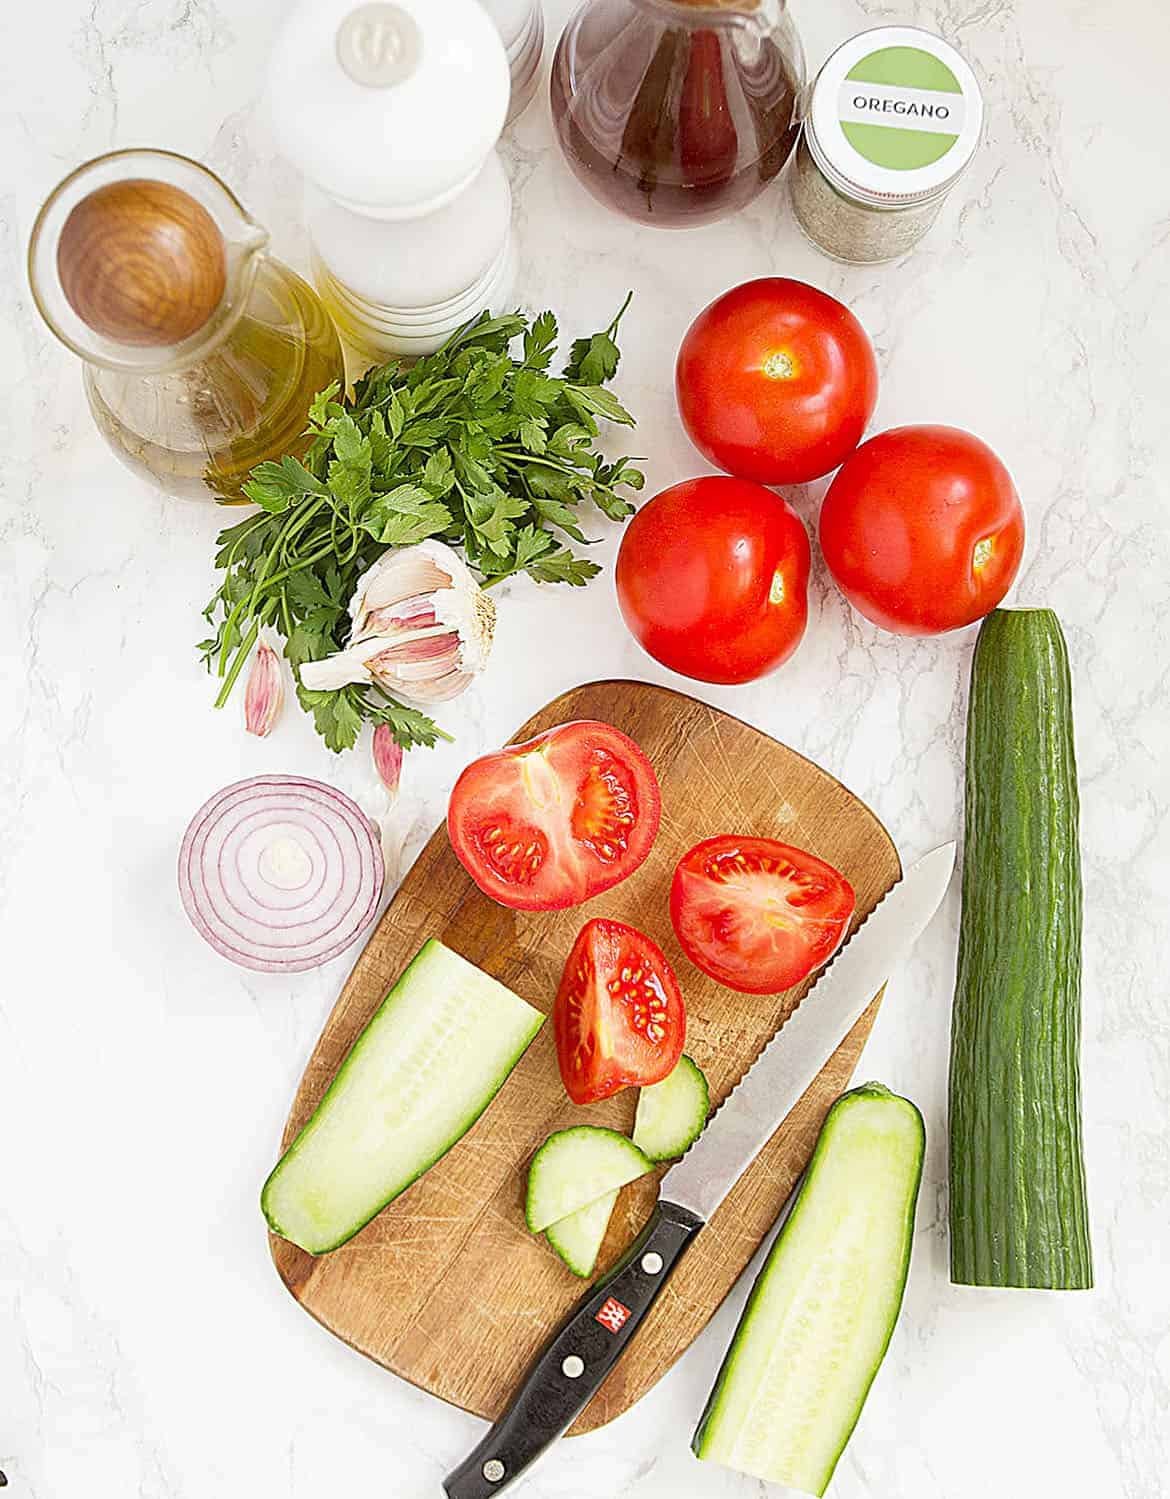 The ingredients for this tomato and cucumber salad are arranged around a chopping board over a white background.